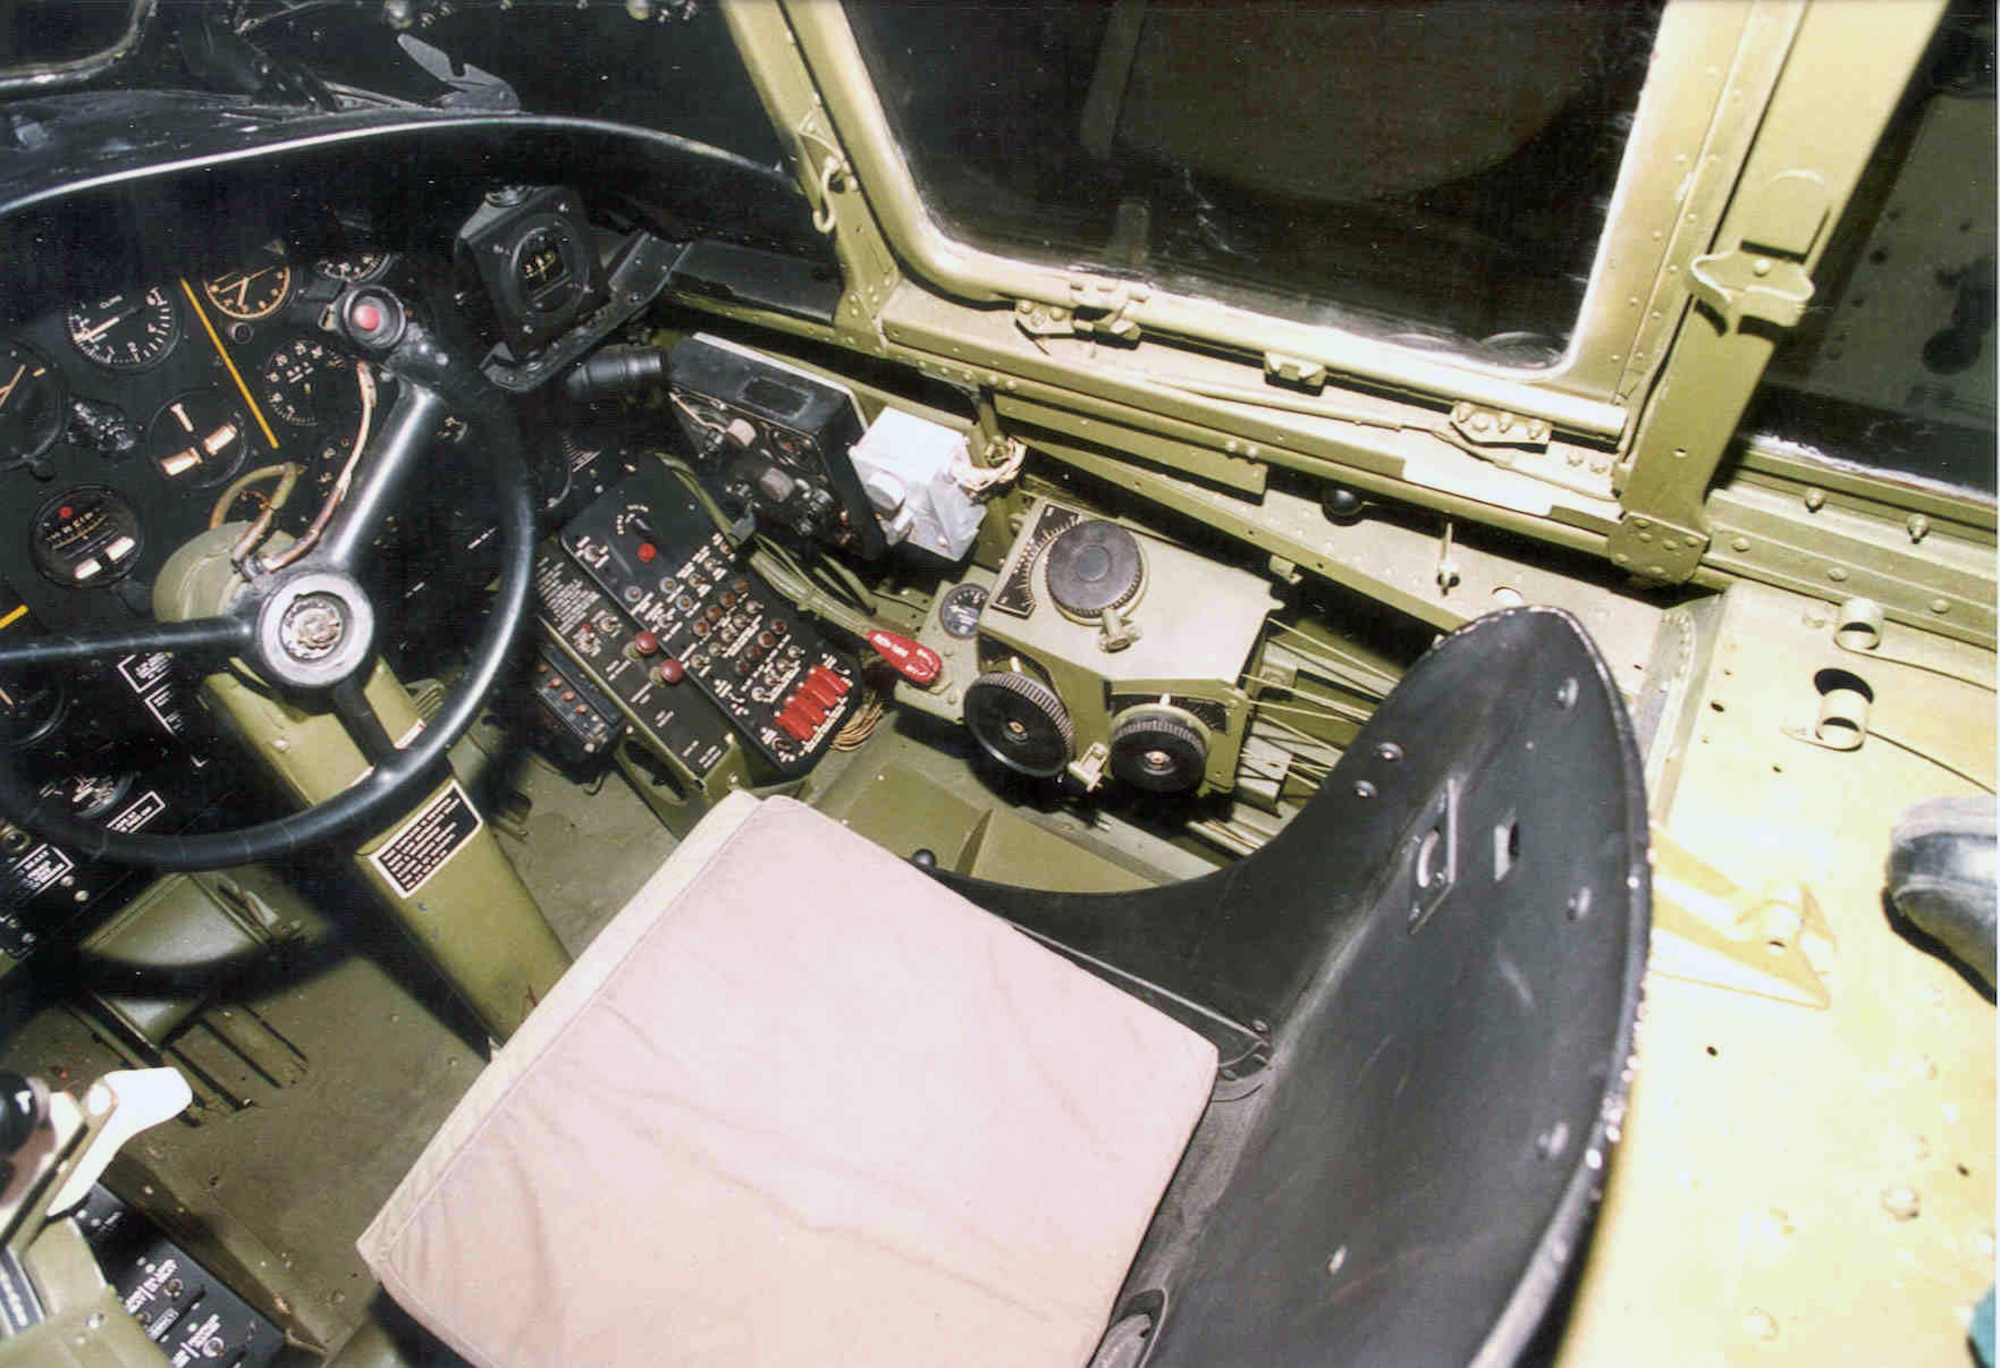 DAYTON, Ohio - Douglas A-20G Havoc cockpit at the National Museum of the U.S. Air Force. (U.S. Air Force photo)